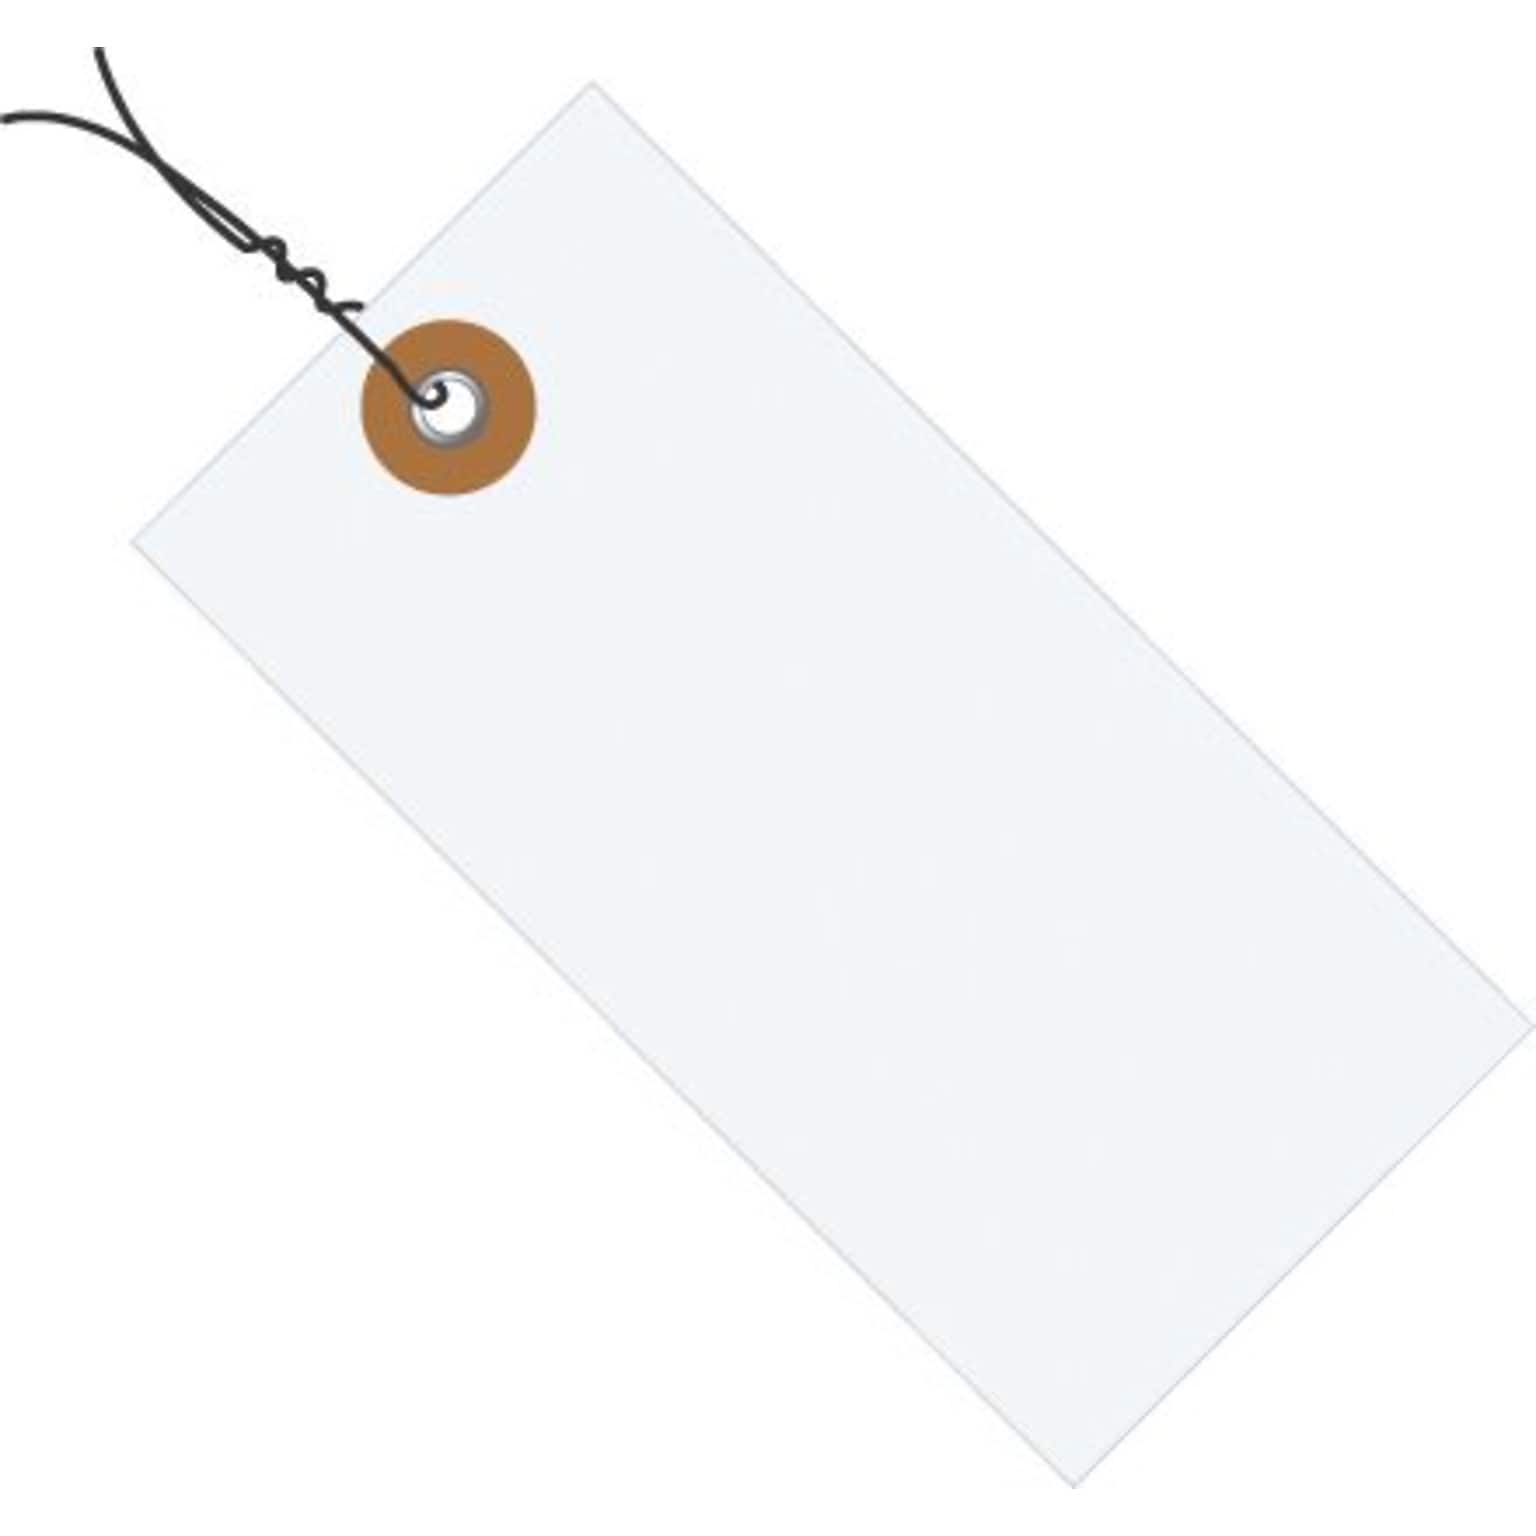 5 3/4 x 2 7/8 Tyvek® Shipping Tag - Pre-Wired, 1000/Case